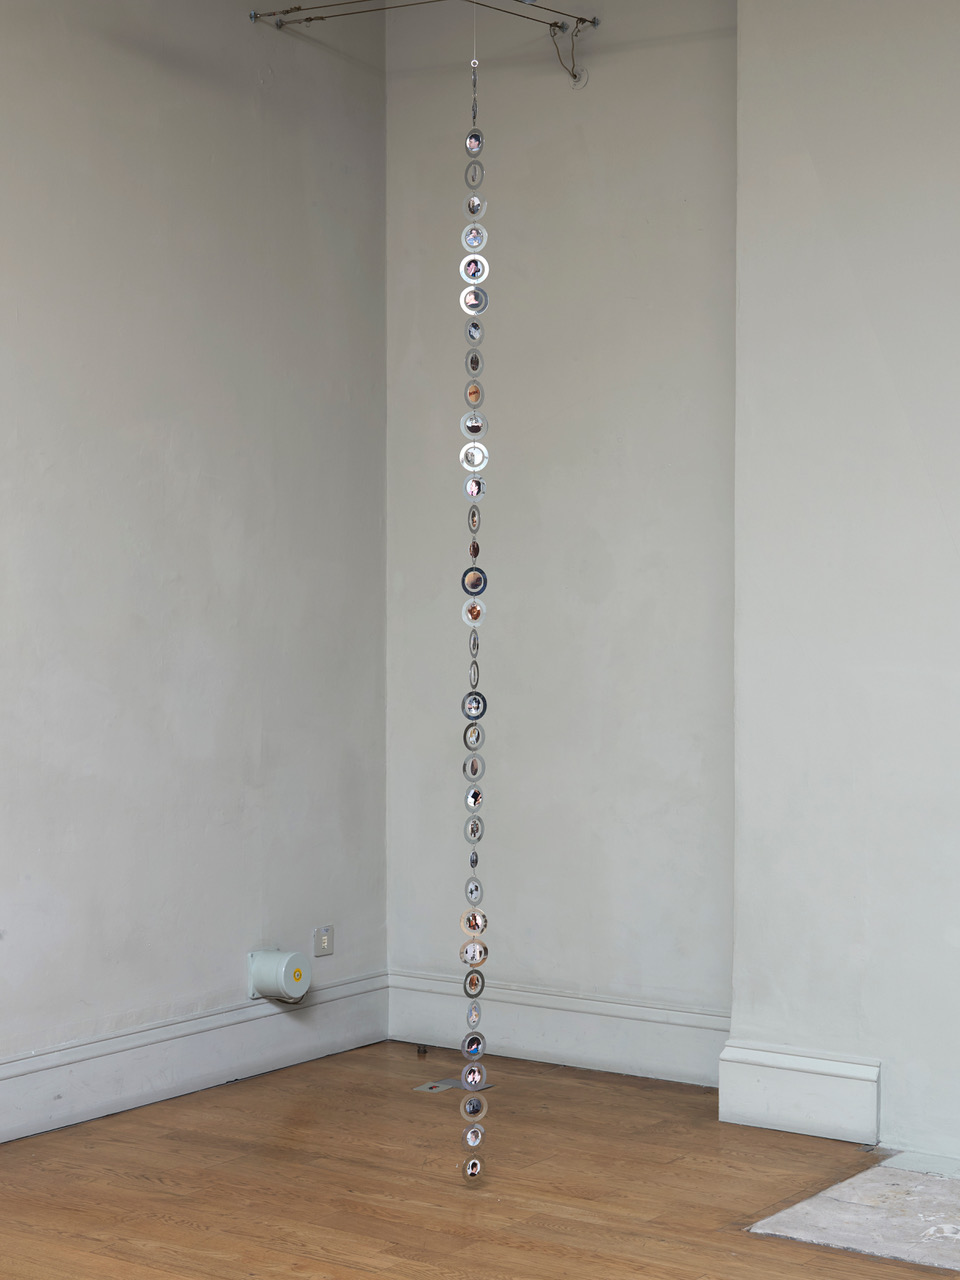 Nicky Hirst 'The Electorate', 'Chadwick Road' metal and photographs 270×7cm, 2022, installation photography by Andy Keate